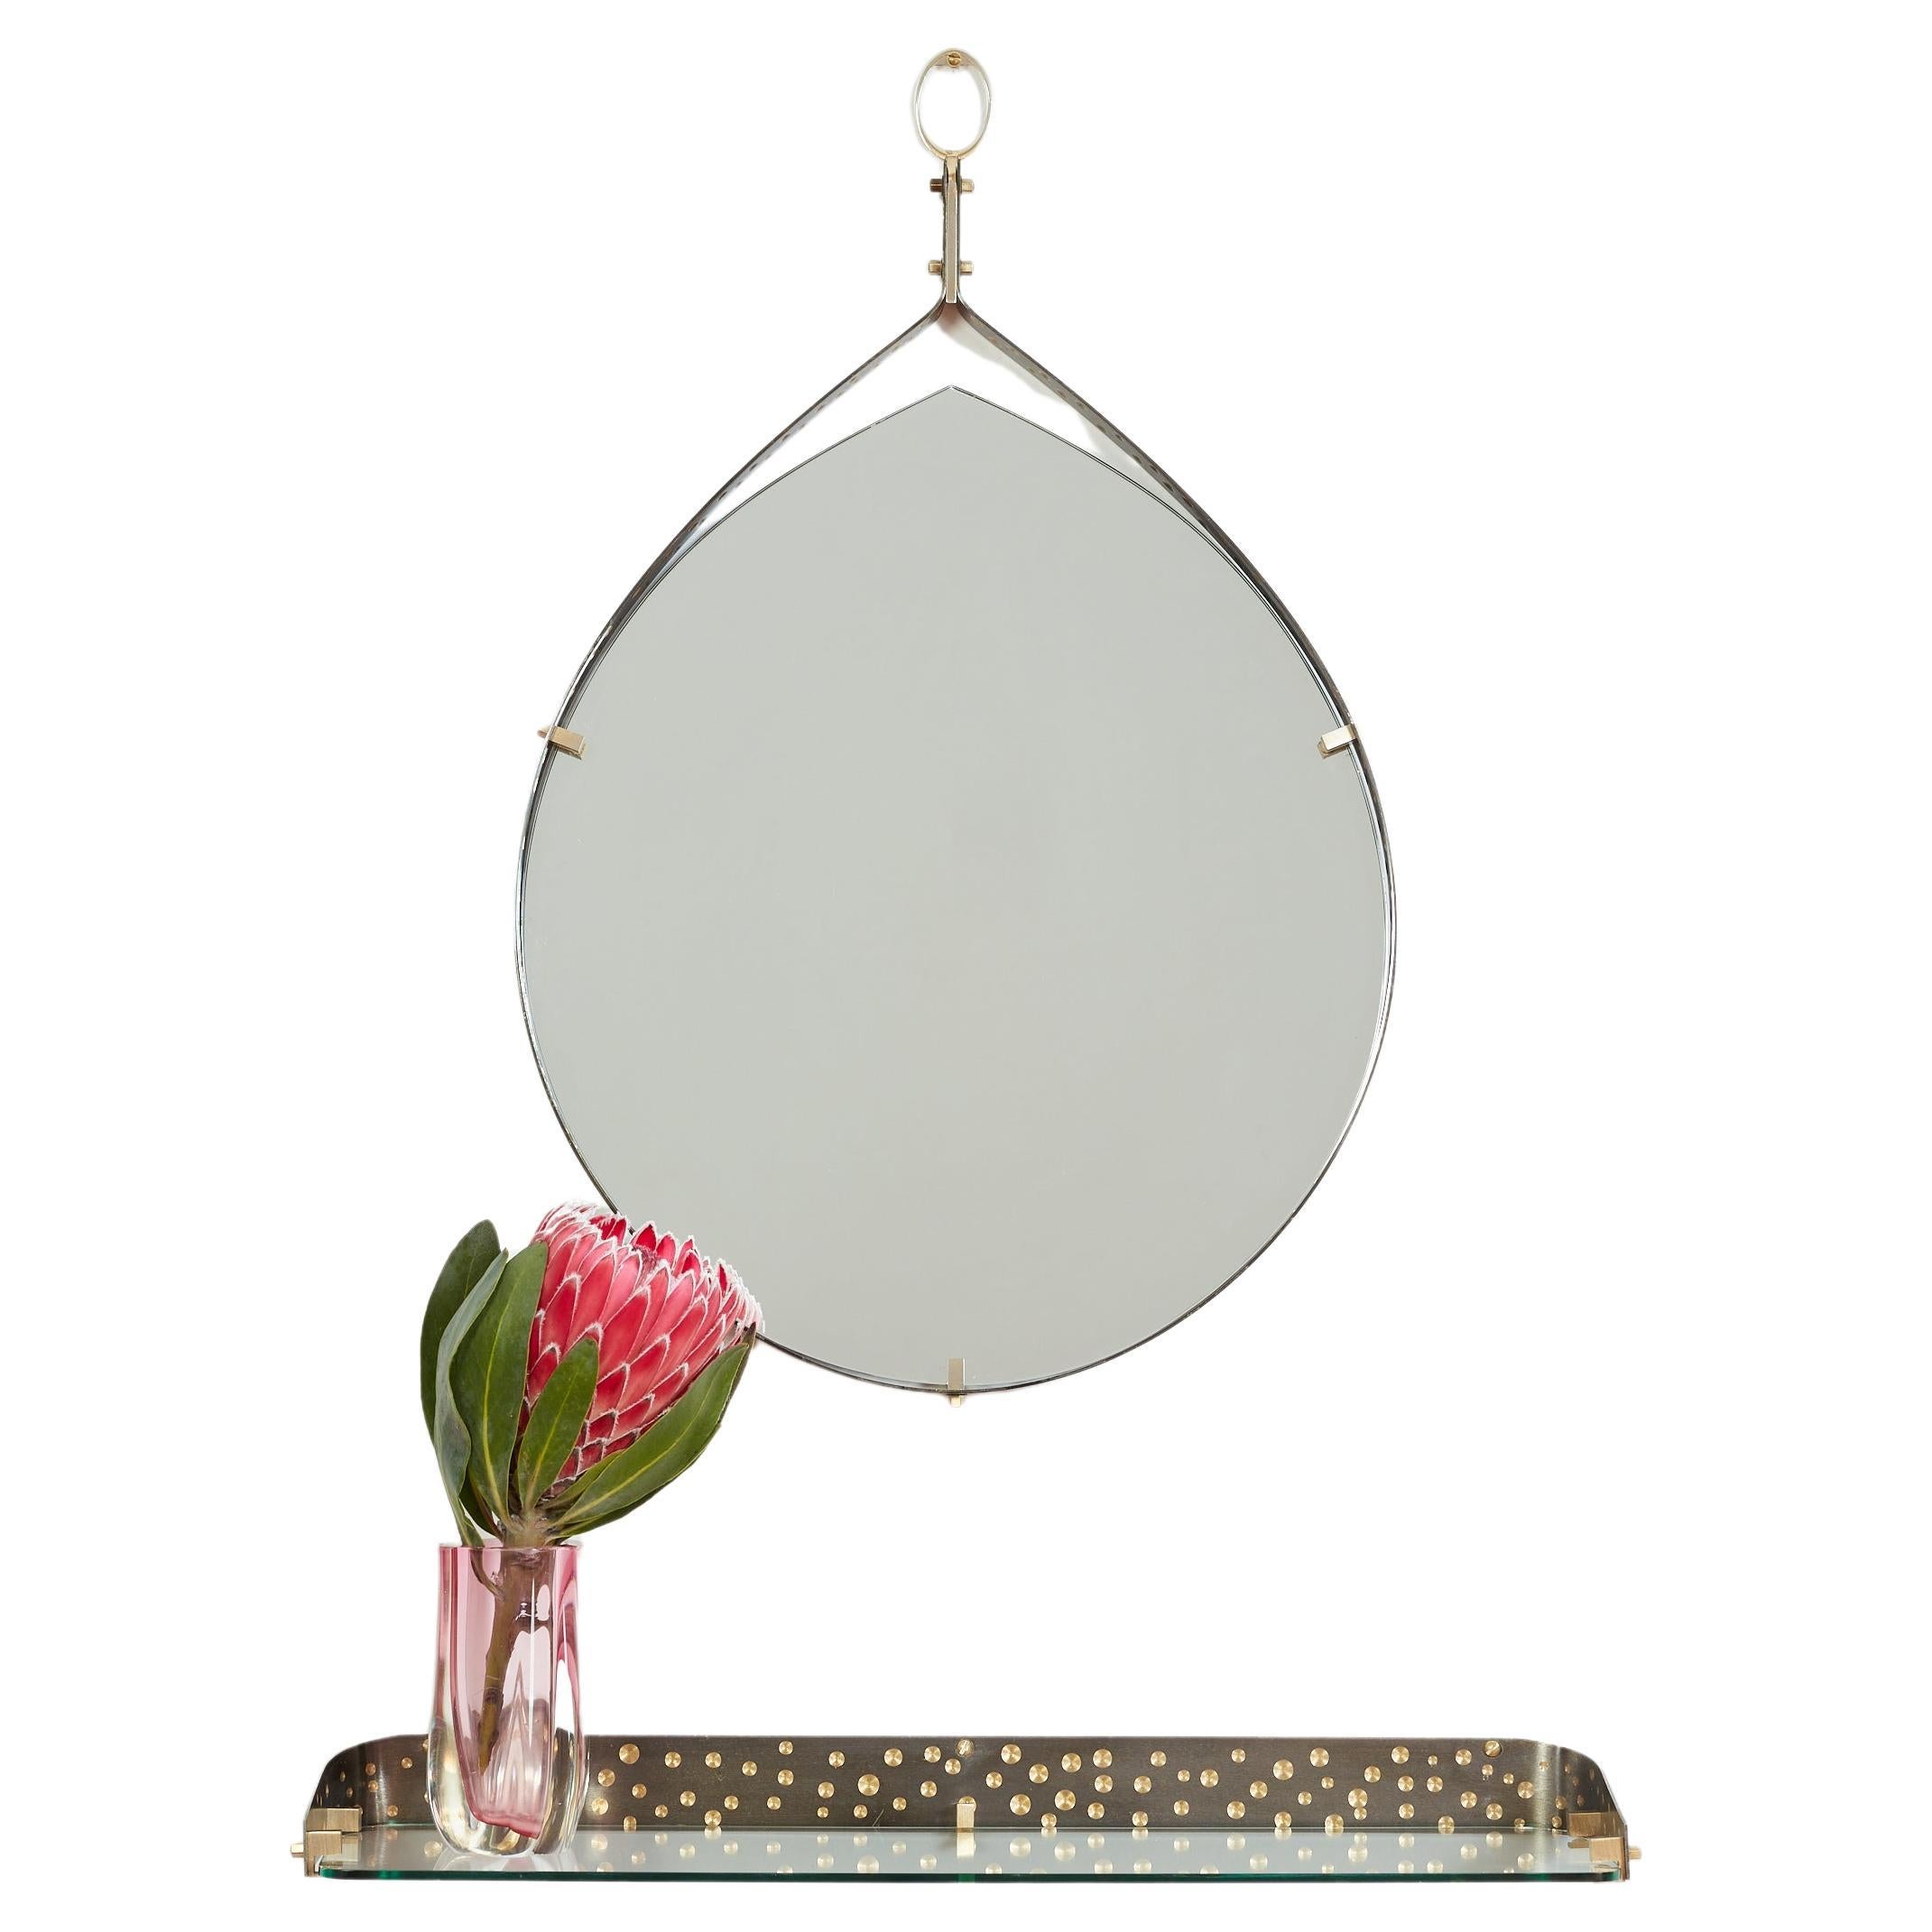 1950's Italian silvered iron and brass tear dropped shaped mirror with perforated brass detail within the edge.  
Designed by Ambrogio  & De Berti - Italy, 1950s - this mirror has a matching floating glass console shelf that sits underneath.